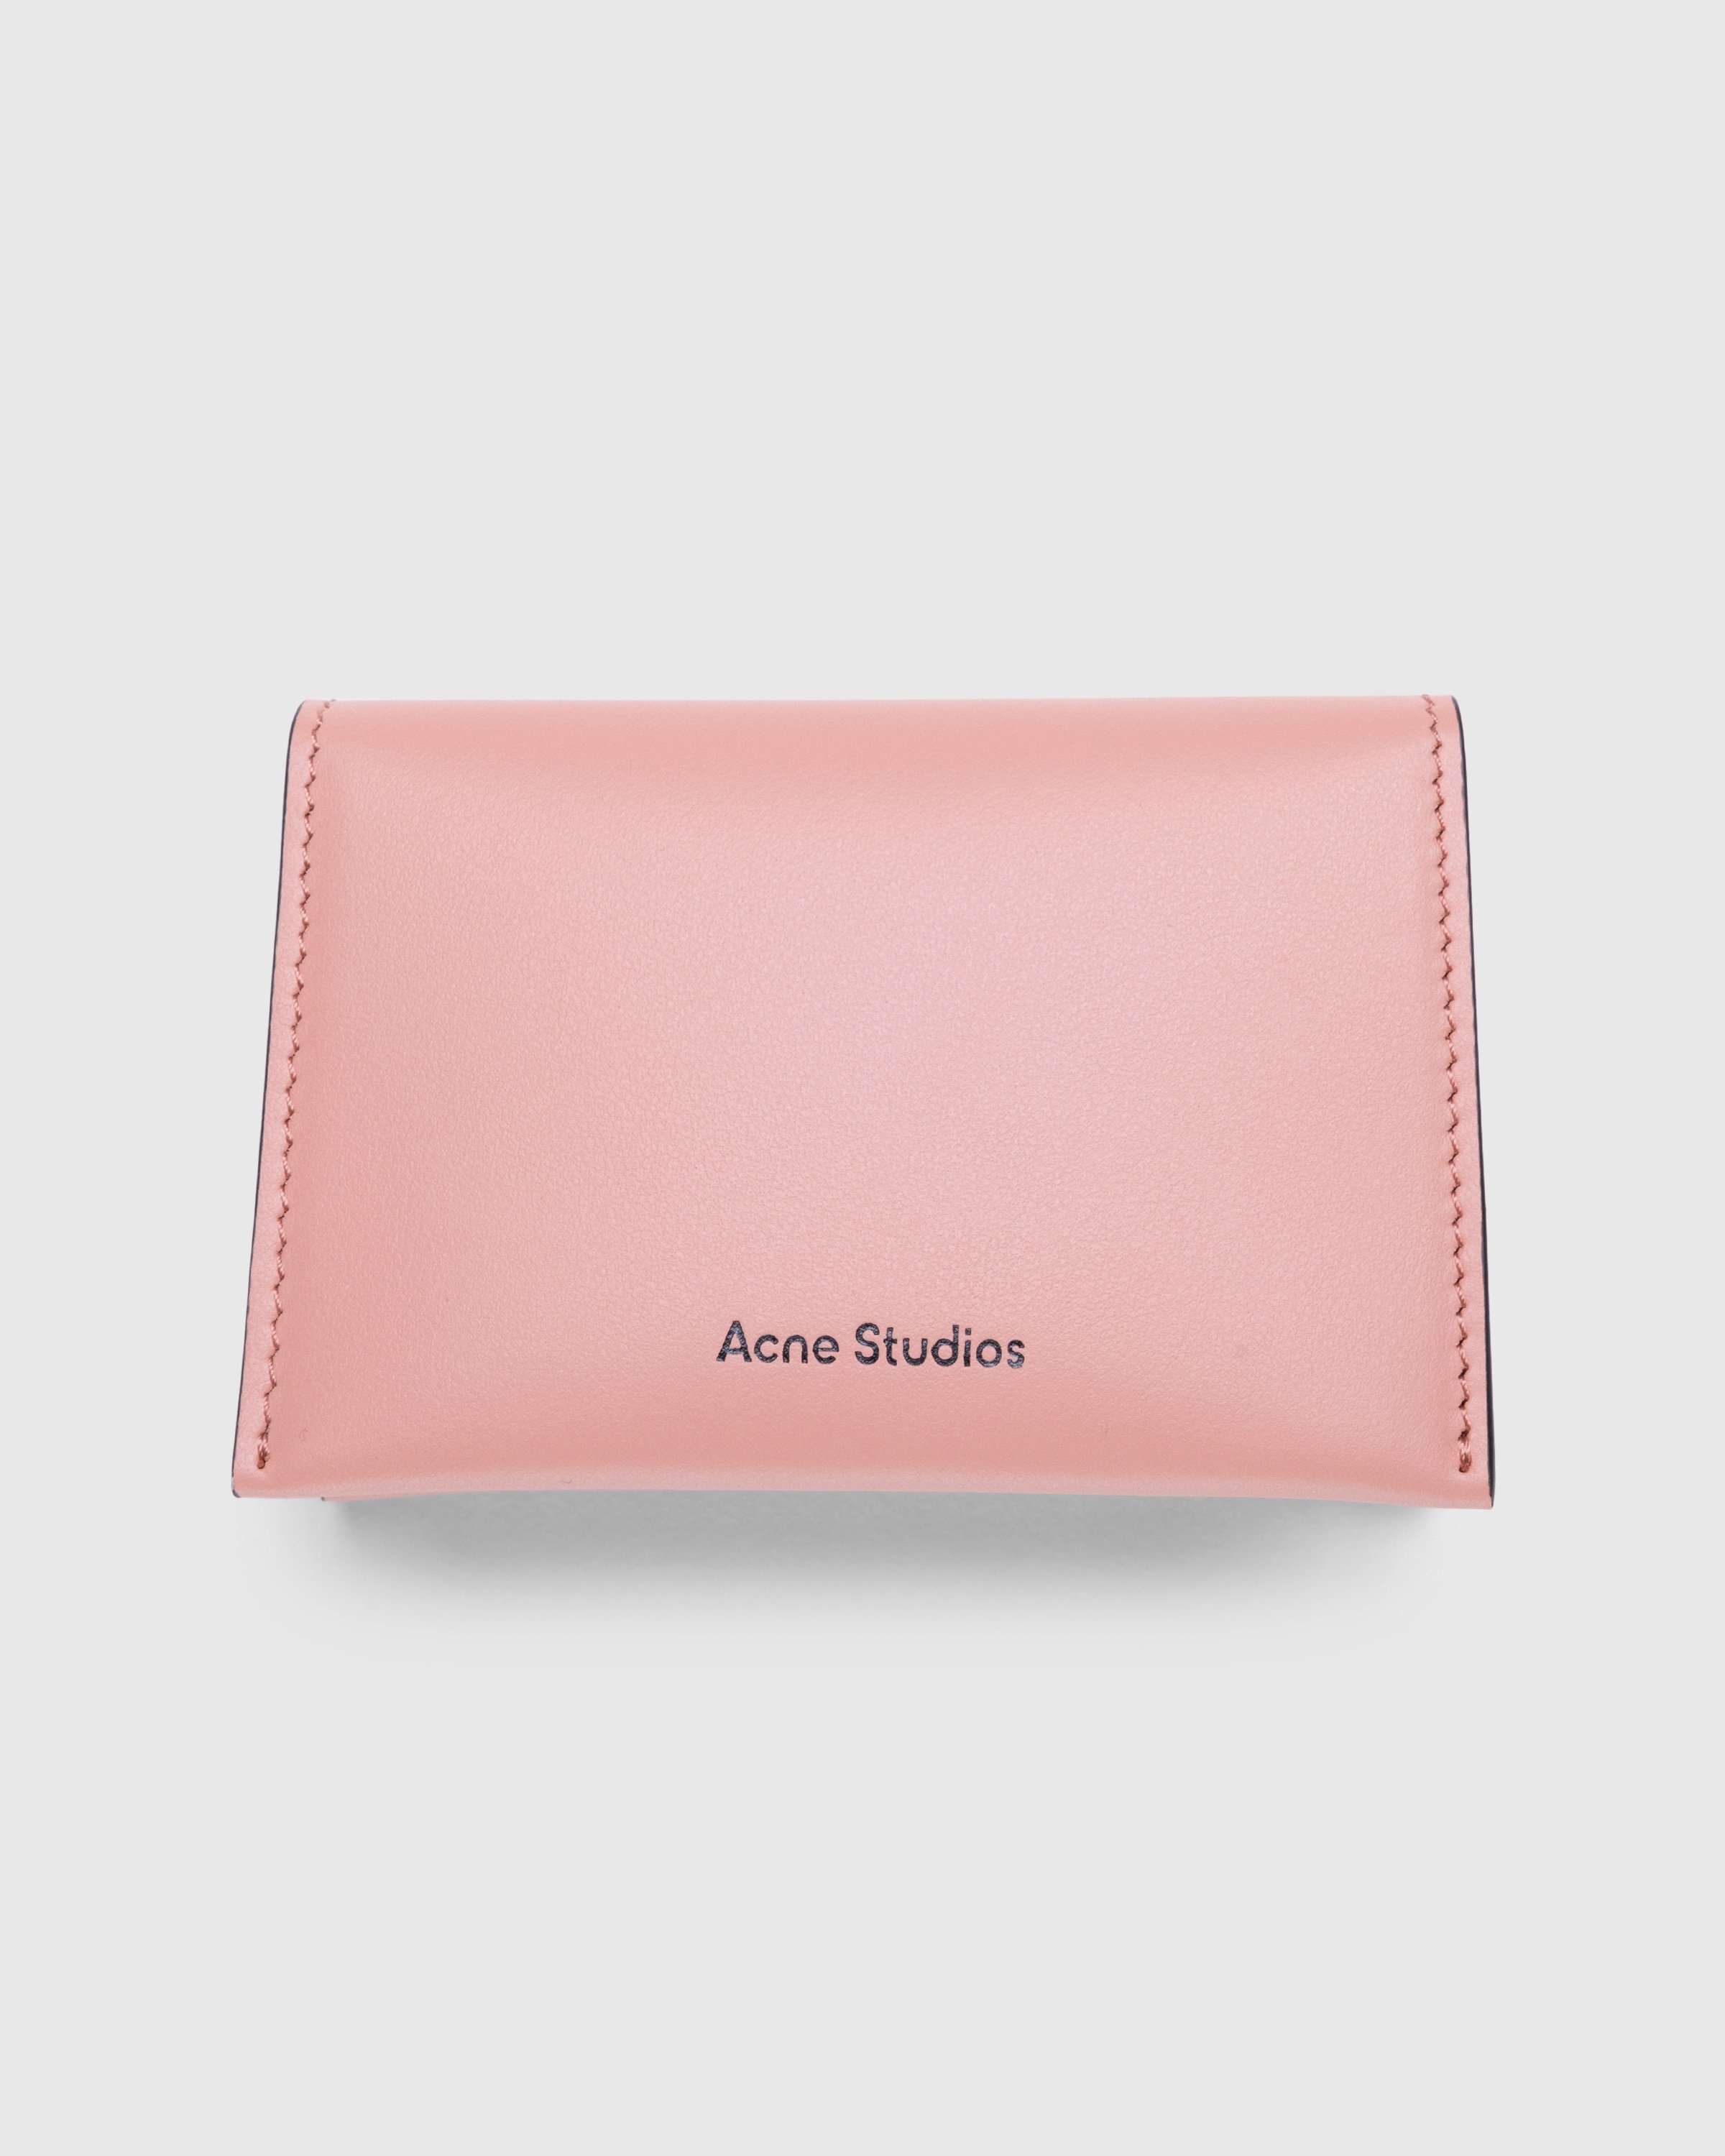 Acne Studios – Folded Leather Card Holder Salmon Pink - Wallets - Pink - Image 1